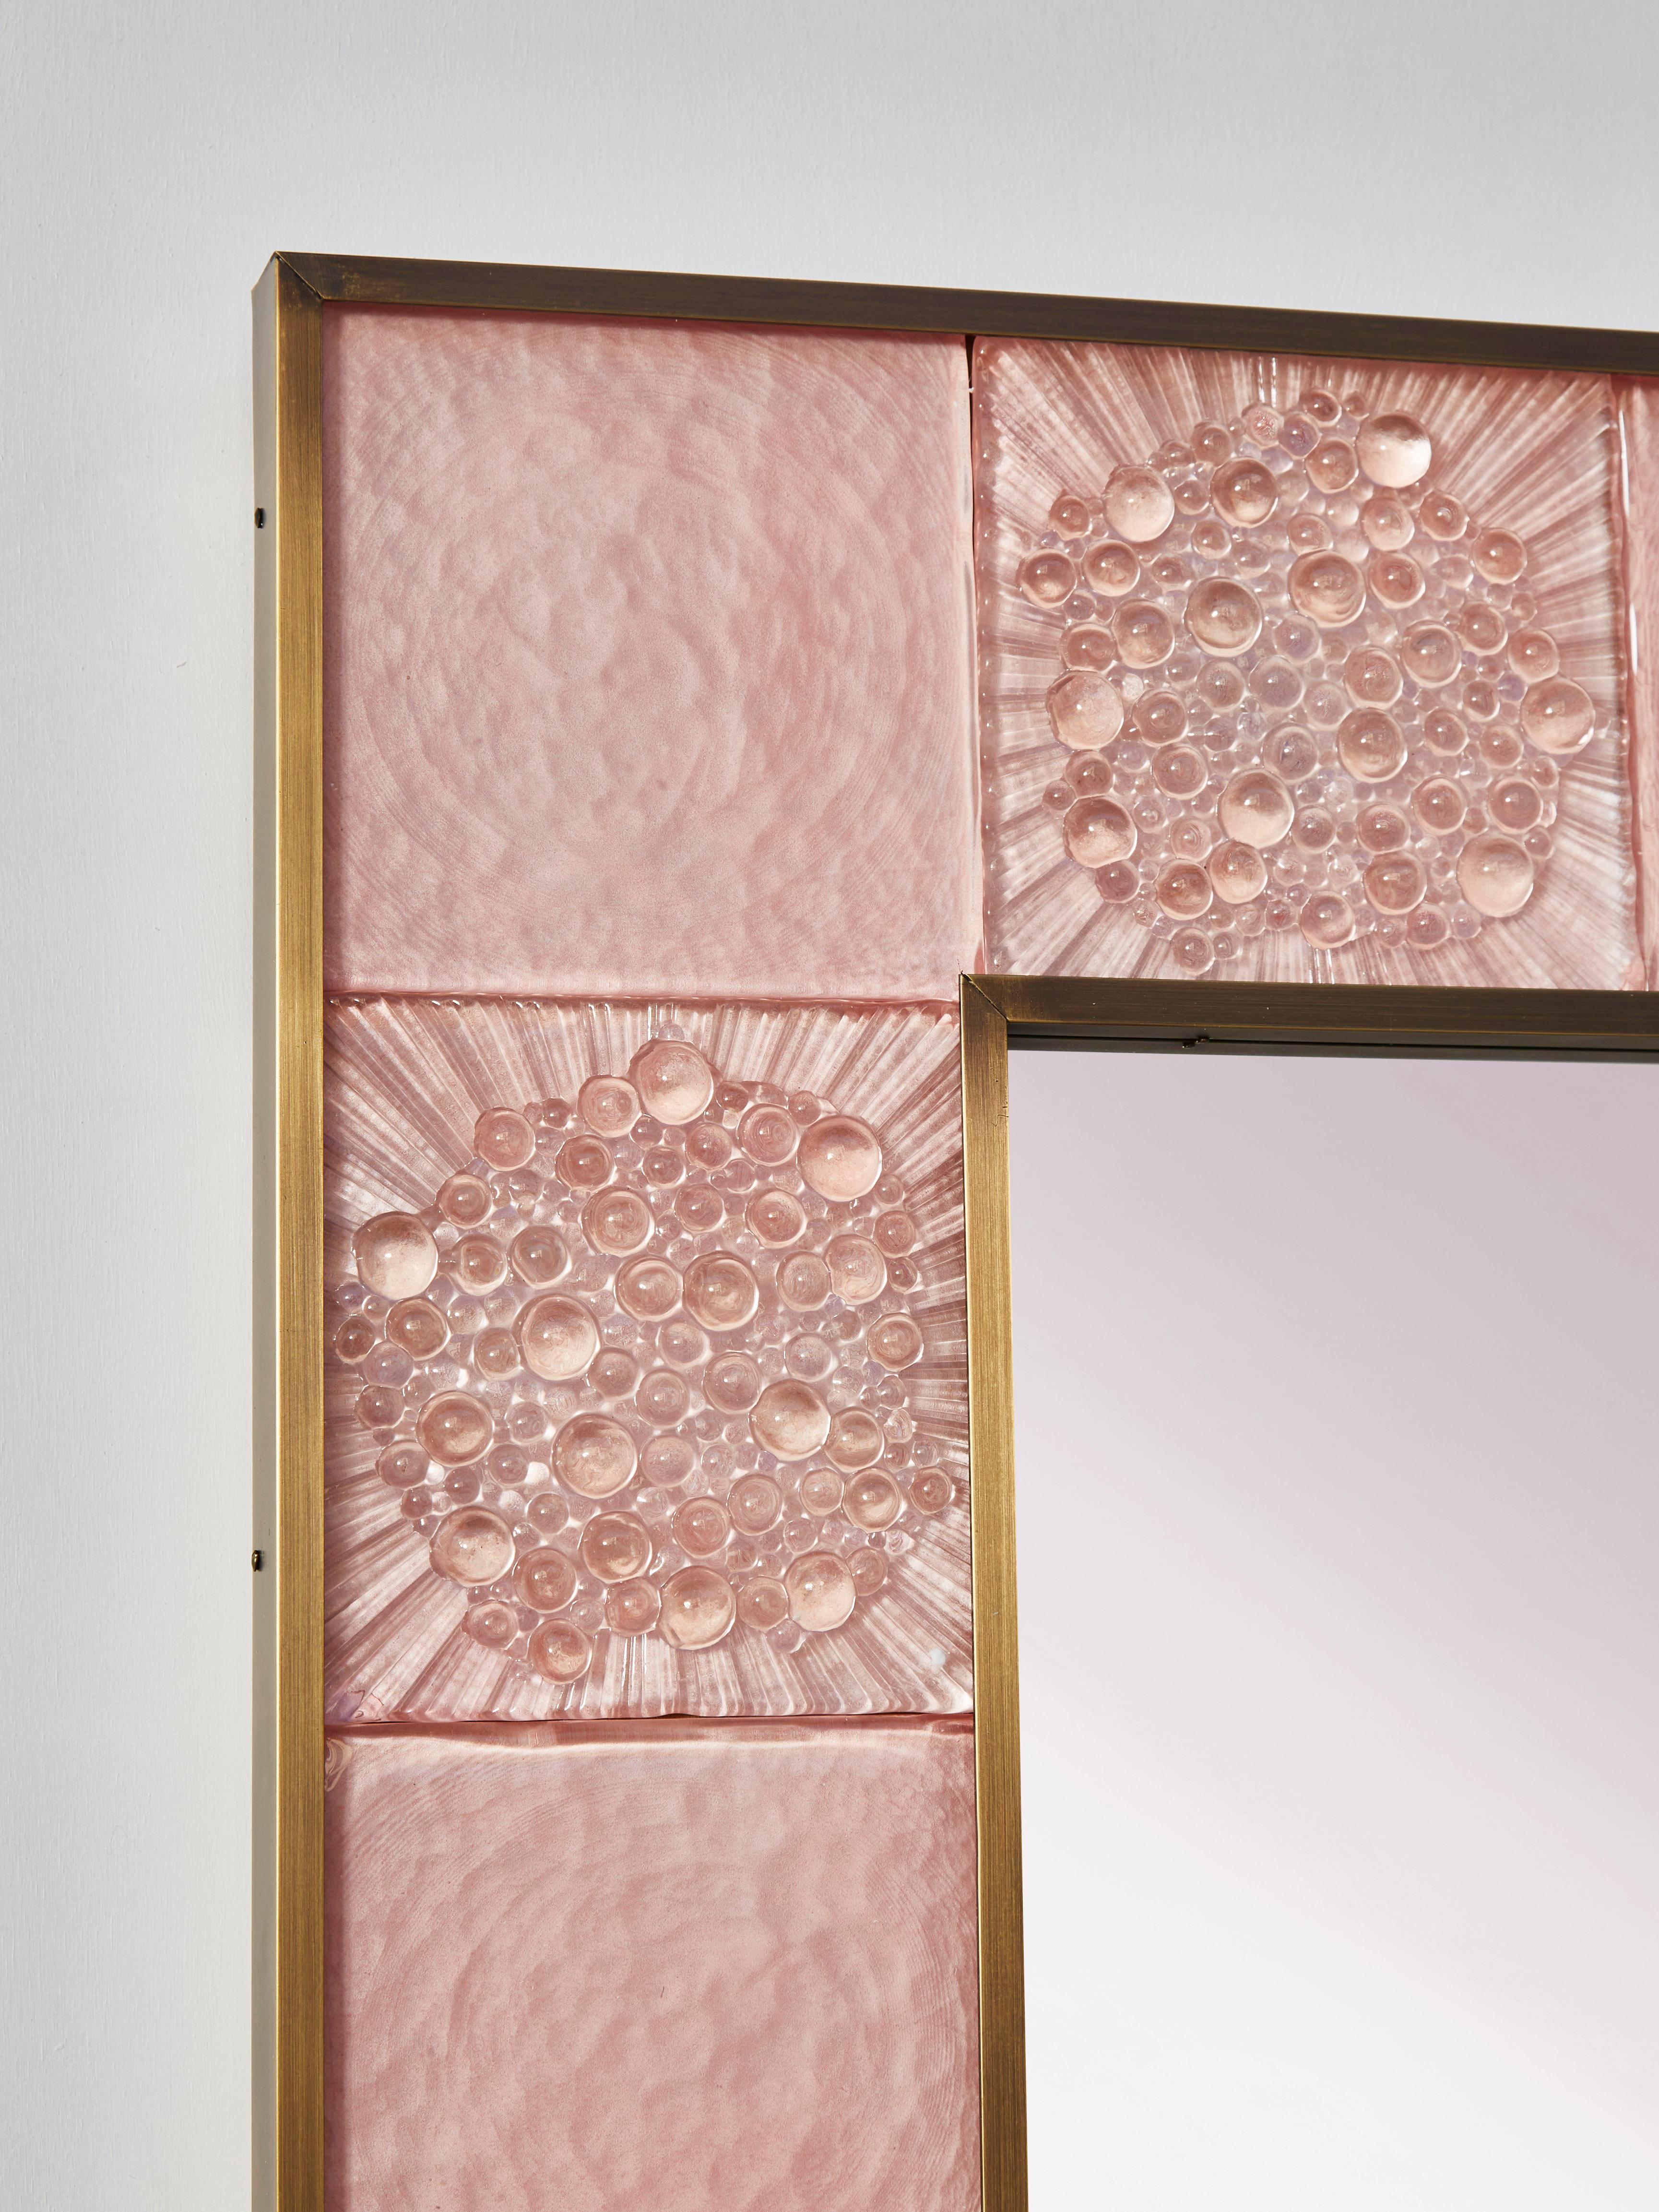 Stunning mirror with a frame in tainted and sculpted Murano glass.
Creation by Studio Glustin.
